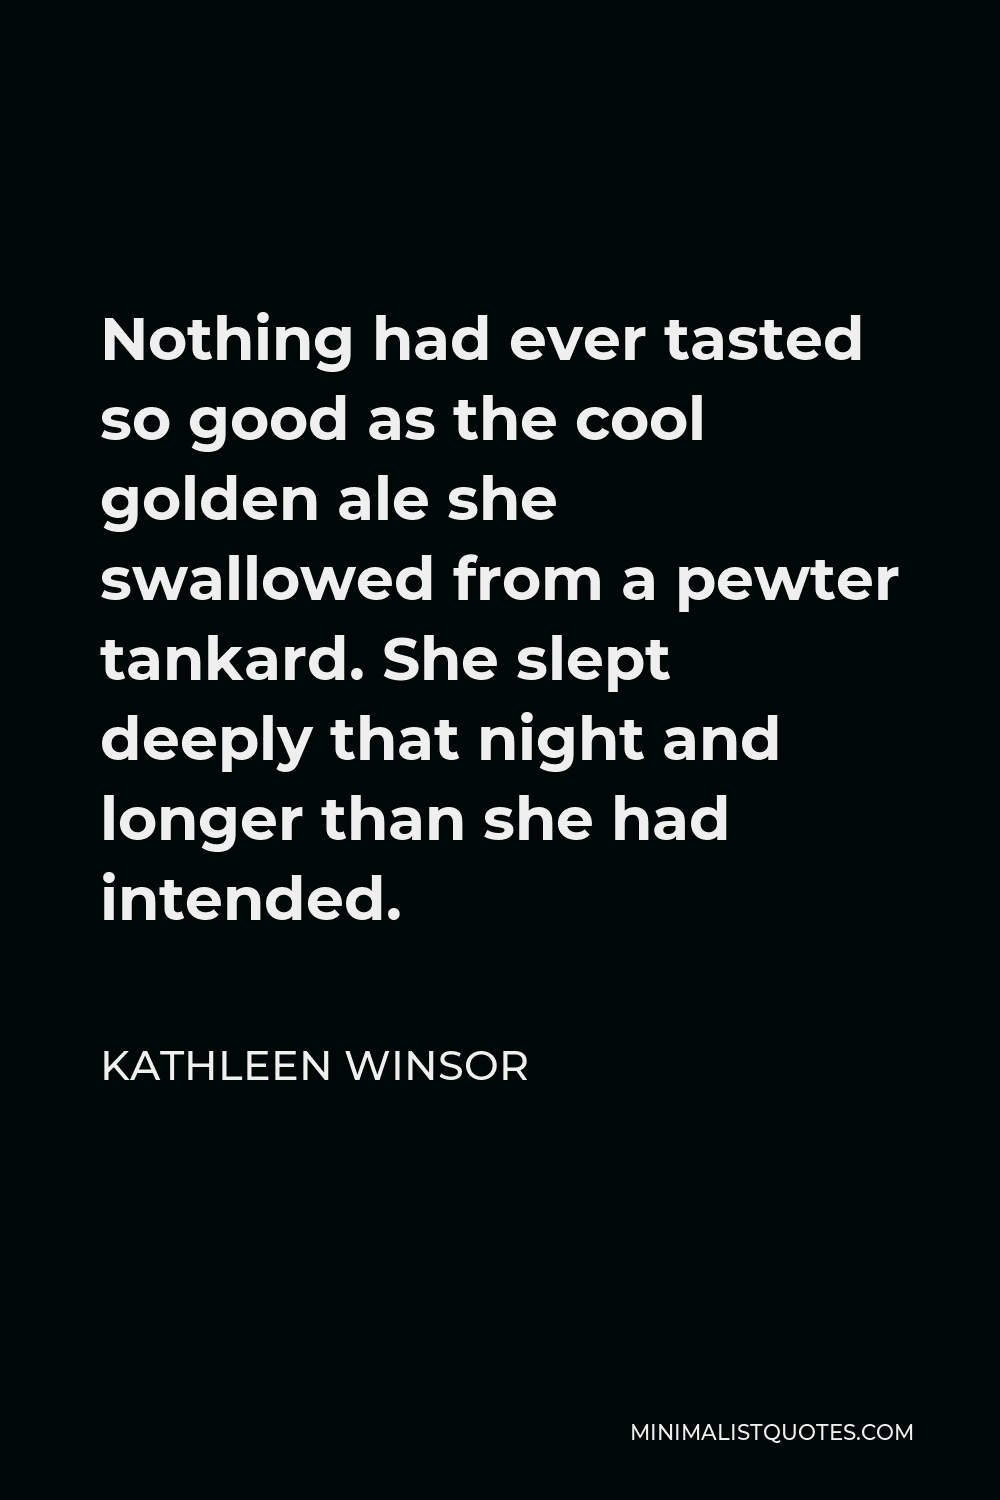 Kathleen Winsor Quote - Nothing had ever tasted so good as the cool golden ale she swallowed from a pewter tankard. She slept deeply that night and longer than she had intended.